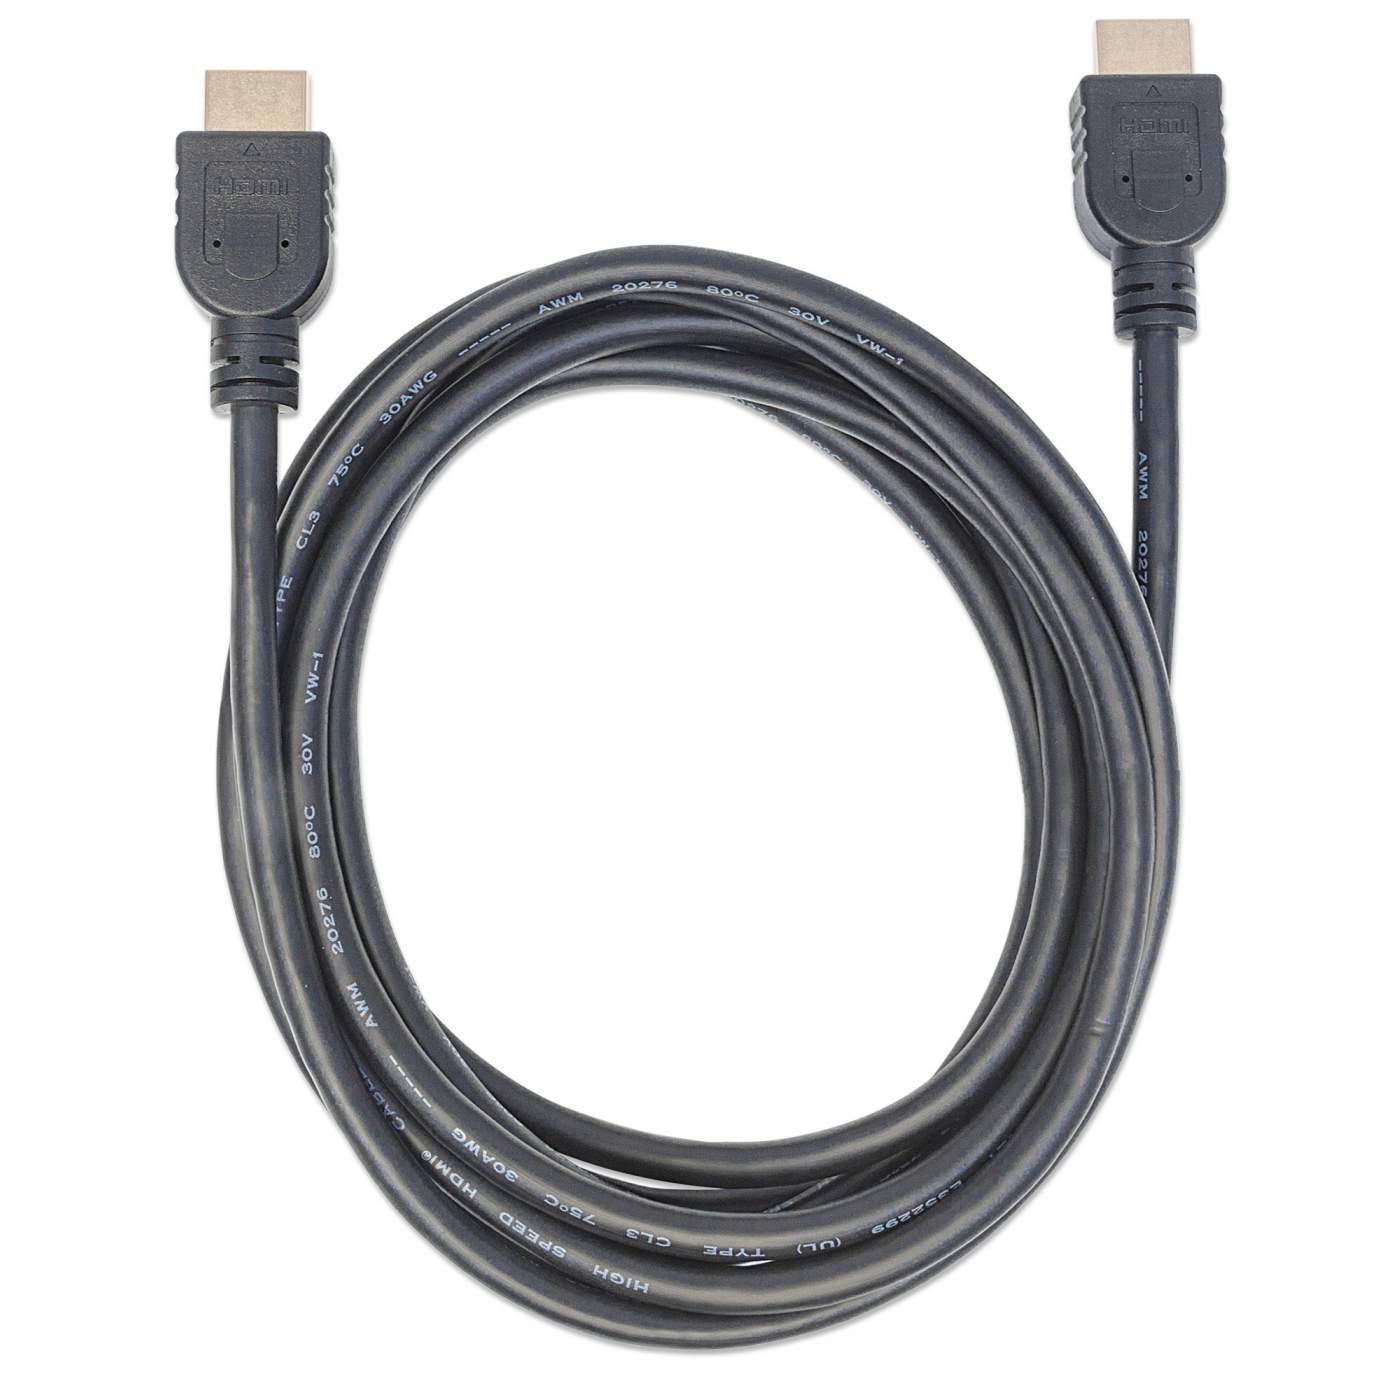 CABLE HDMI 5 MTS NORMAL